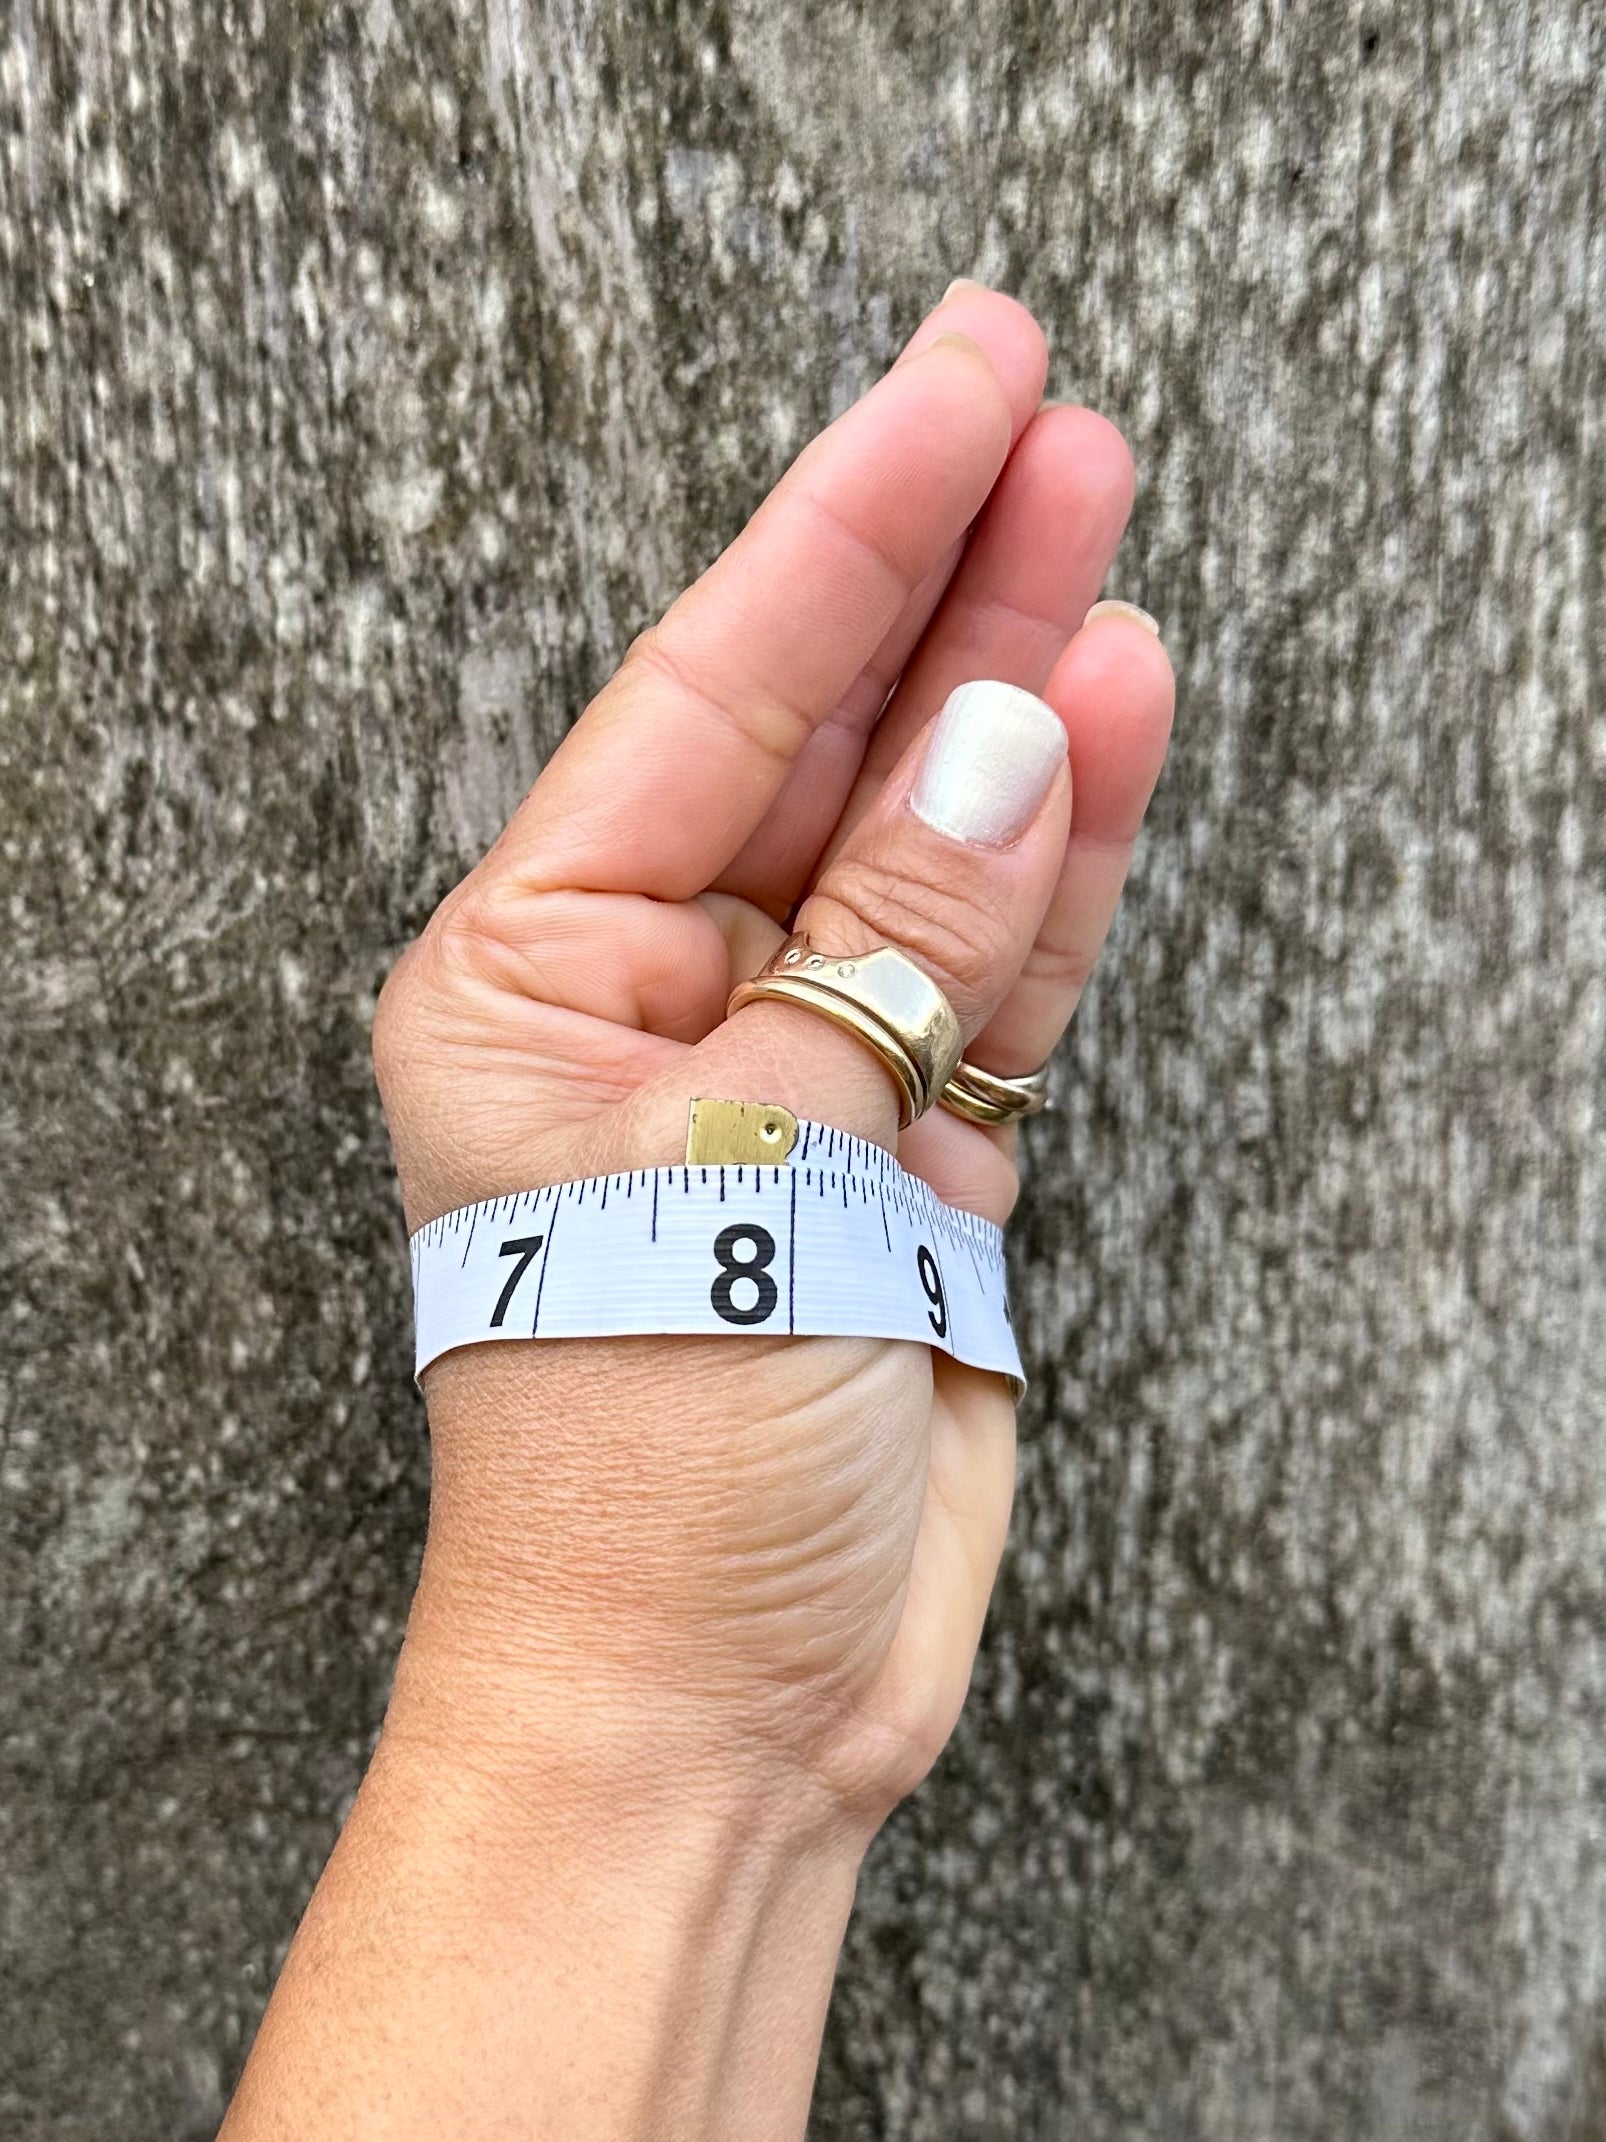  a hand is held up with thumb and pinky touching. there is a tape measure wraped around the largest part of the hand and it shows a 7 and a half measurement. the hand is onfront of a wooden board